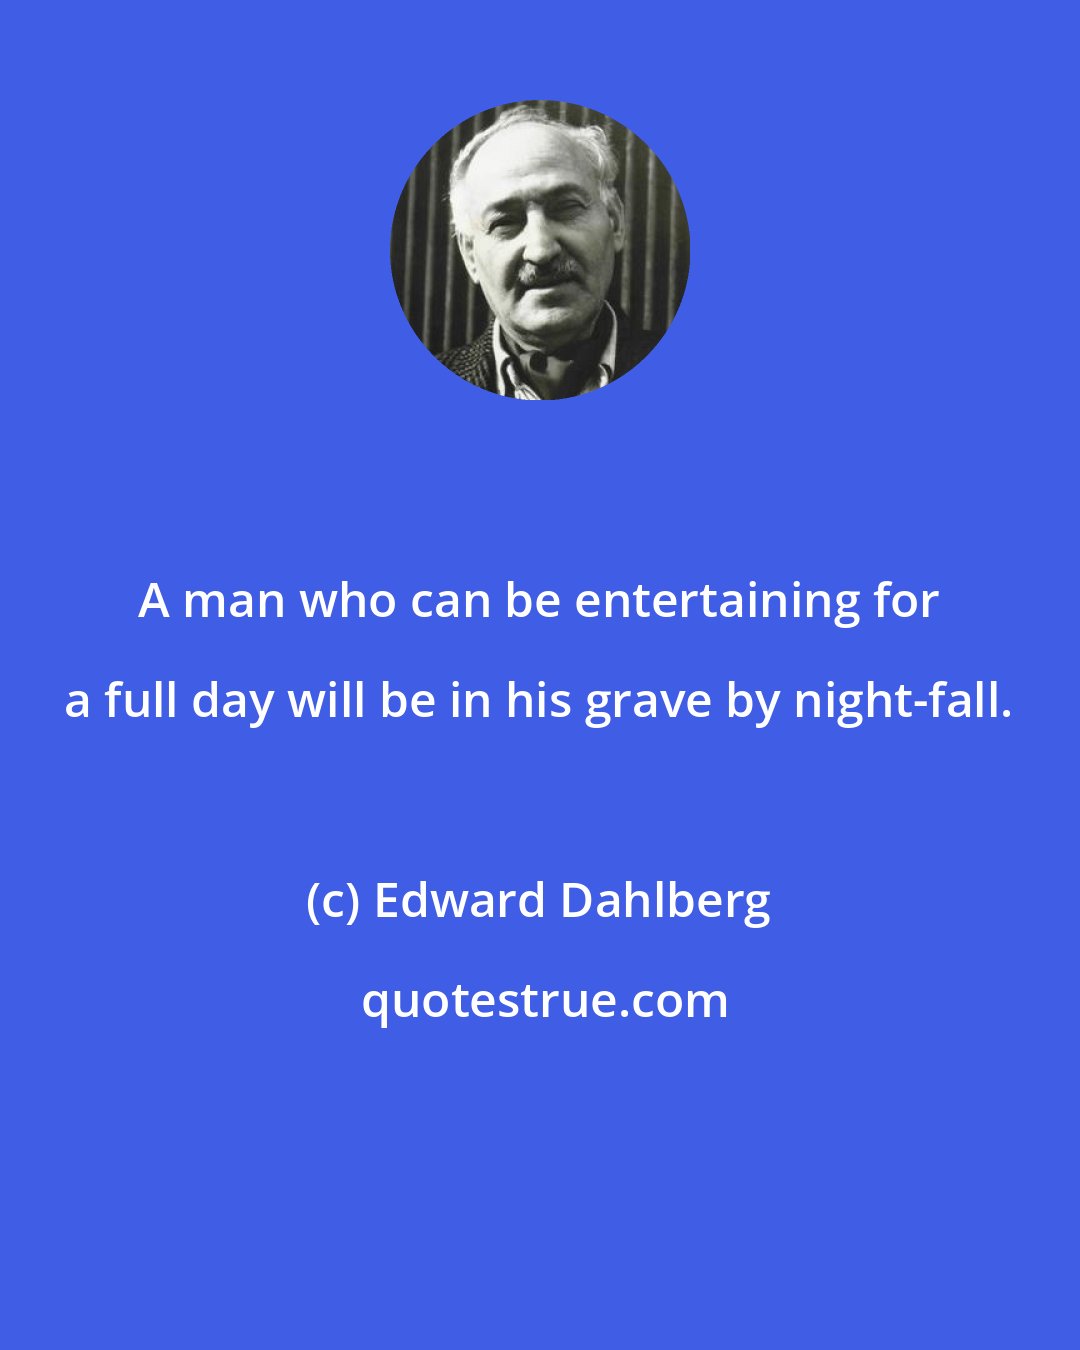 Edward Dahlberg: A man who can be entertaining for a full day will be in his grave by night-fall.